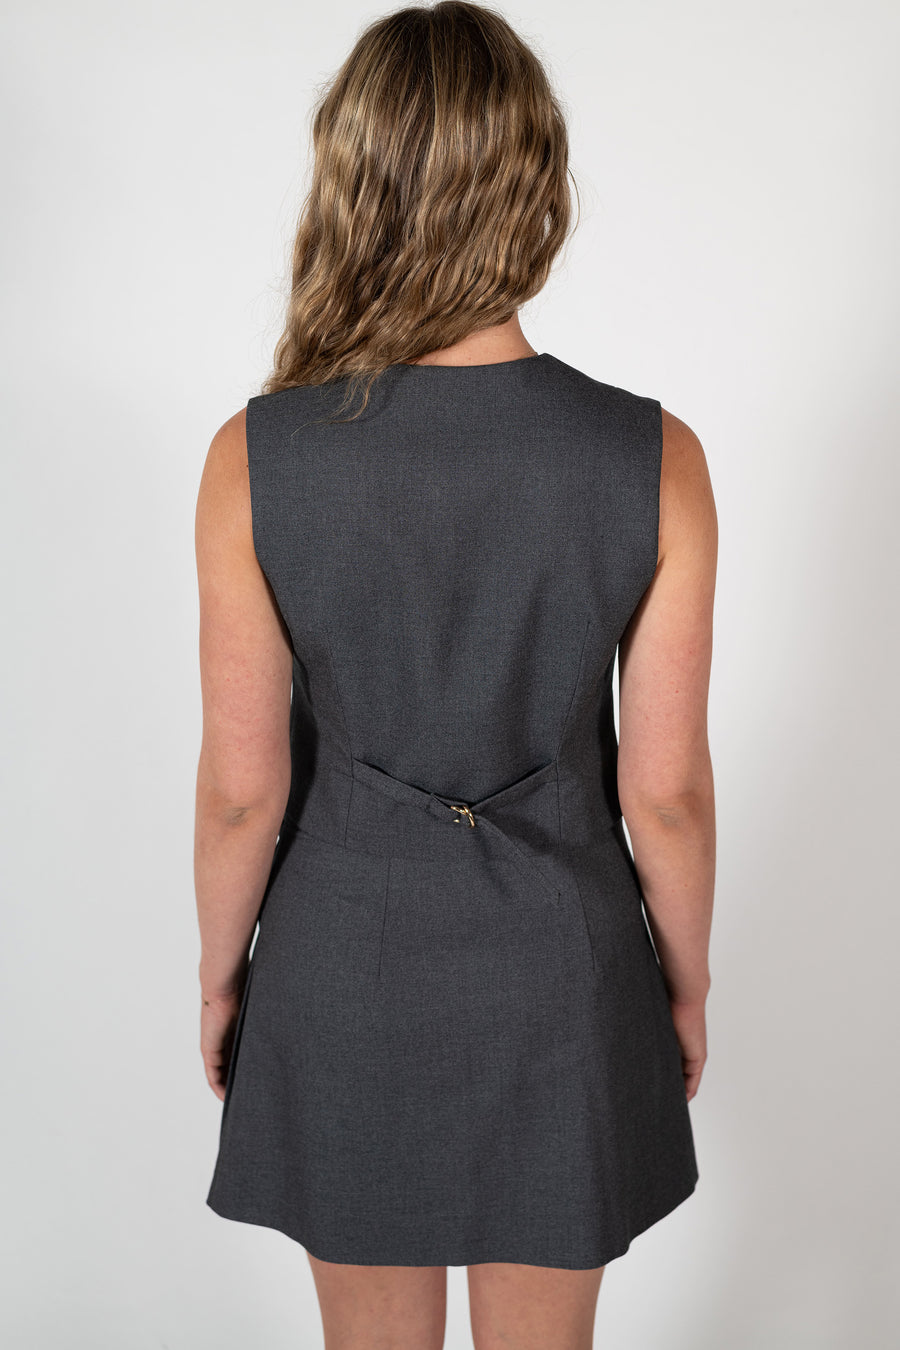 Back details of the Acme Grey Tailored Vest by House of Campbell.